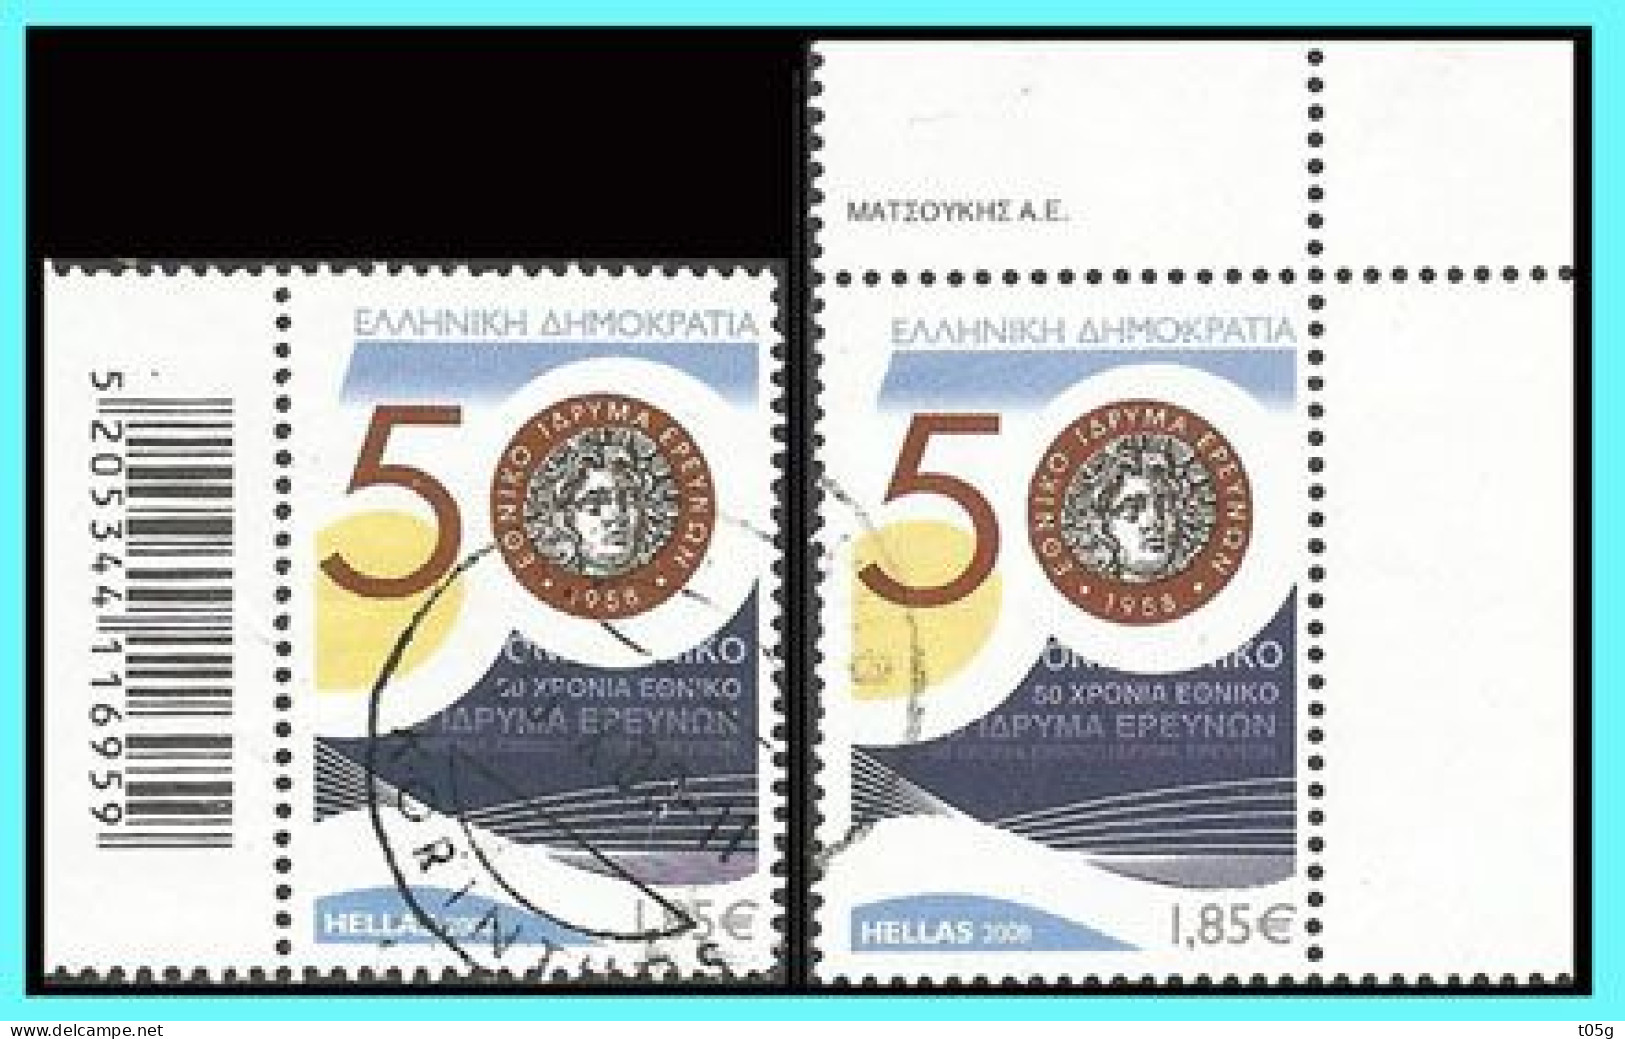 GREECE- GRECE - HELLAS 2008: 2 X 1.85€ (with Barcode) Frοm Set Used - Used Stamps